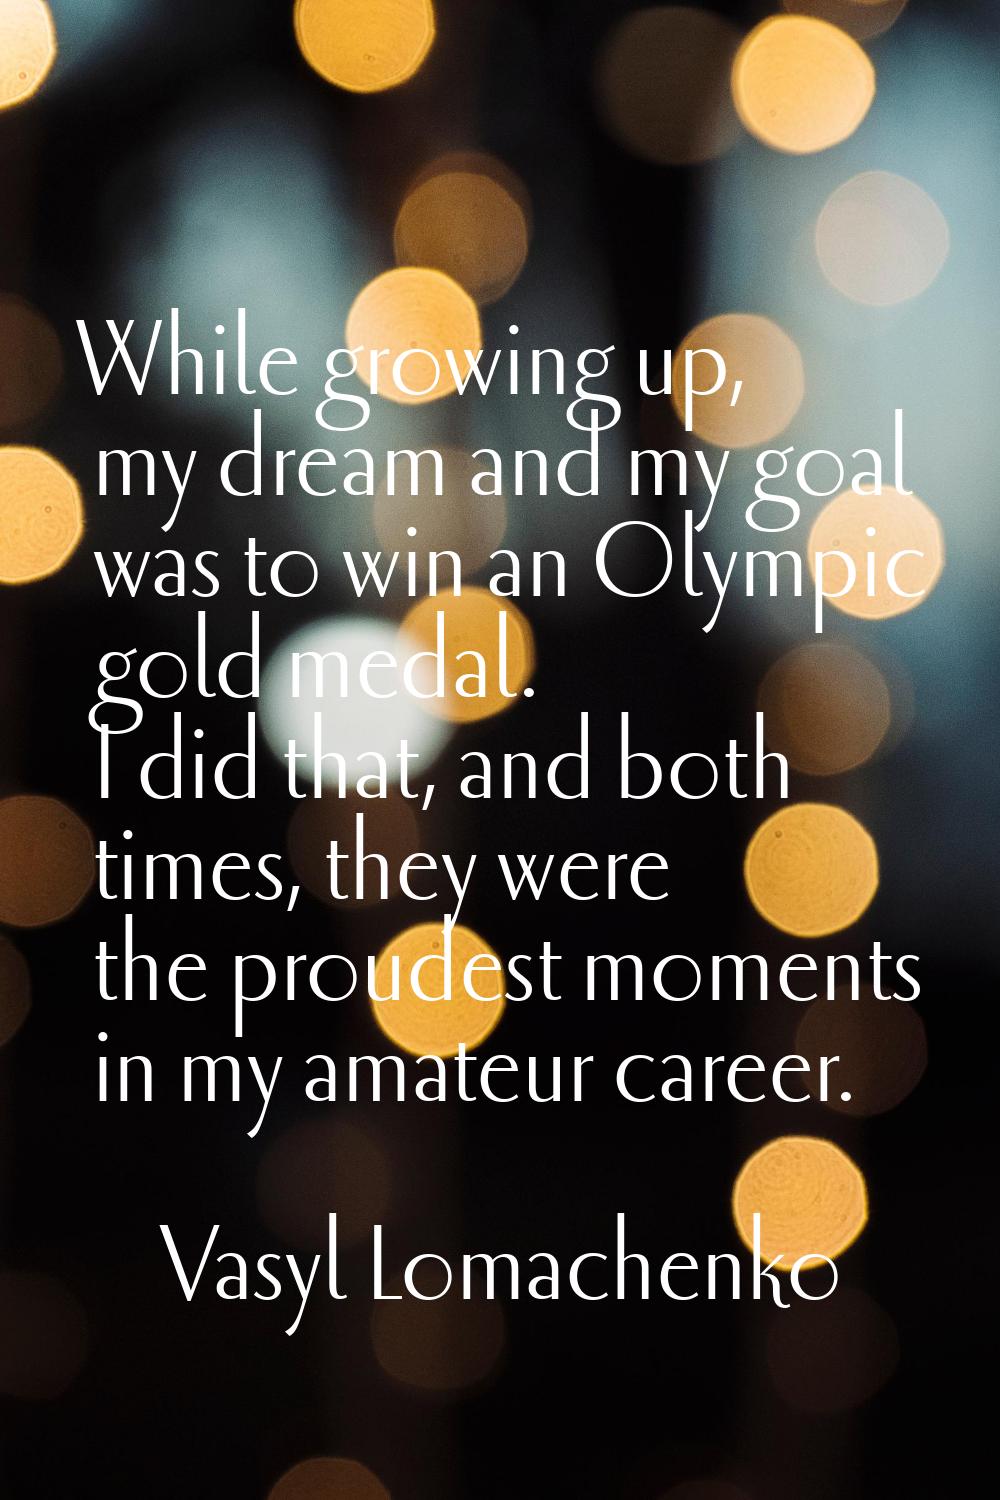 While growing up, my dream and my goal was to win an Olympic gold medal. I did that, and both times